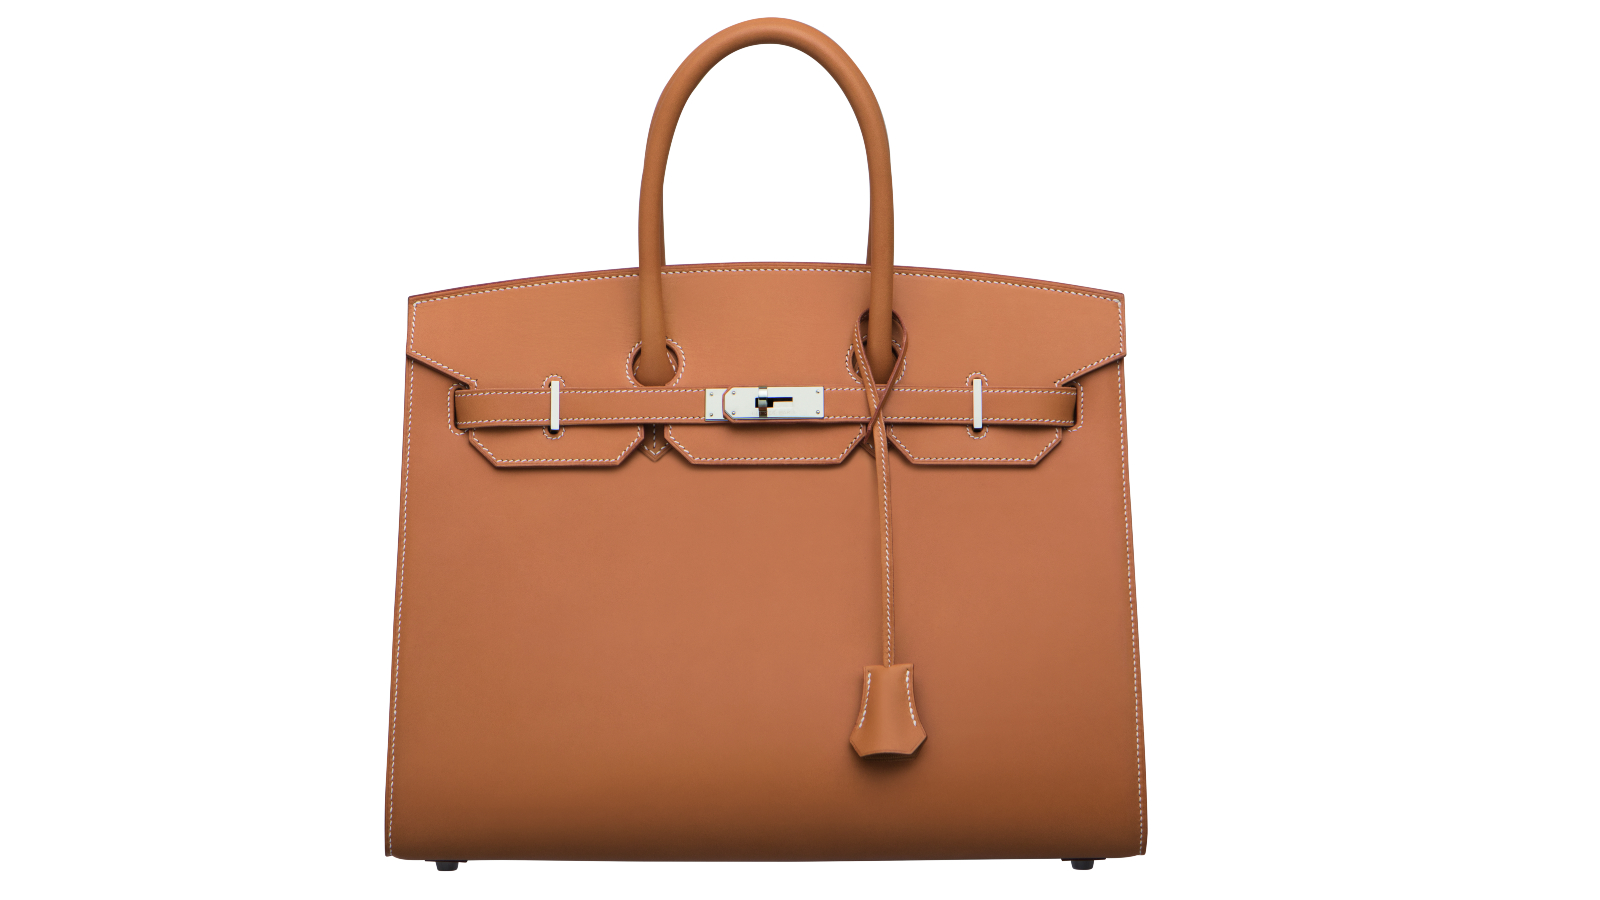 This Birkin Bag May Be A Better Investment Than Other Luxury Items, Says Research | RobbReport ...